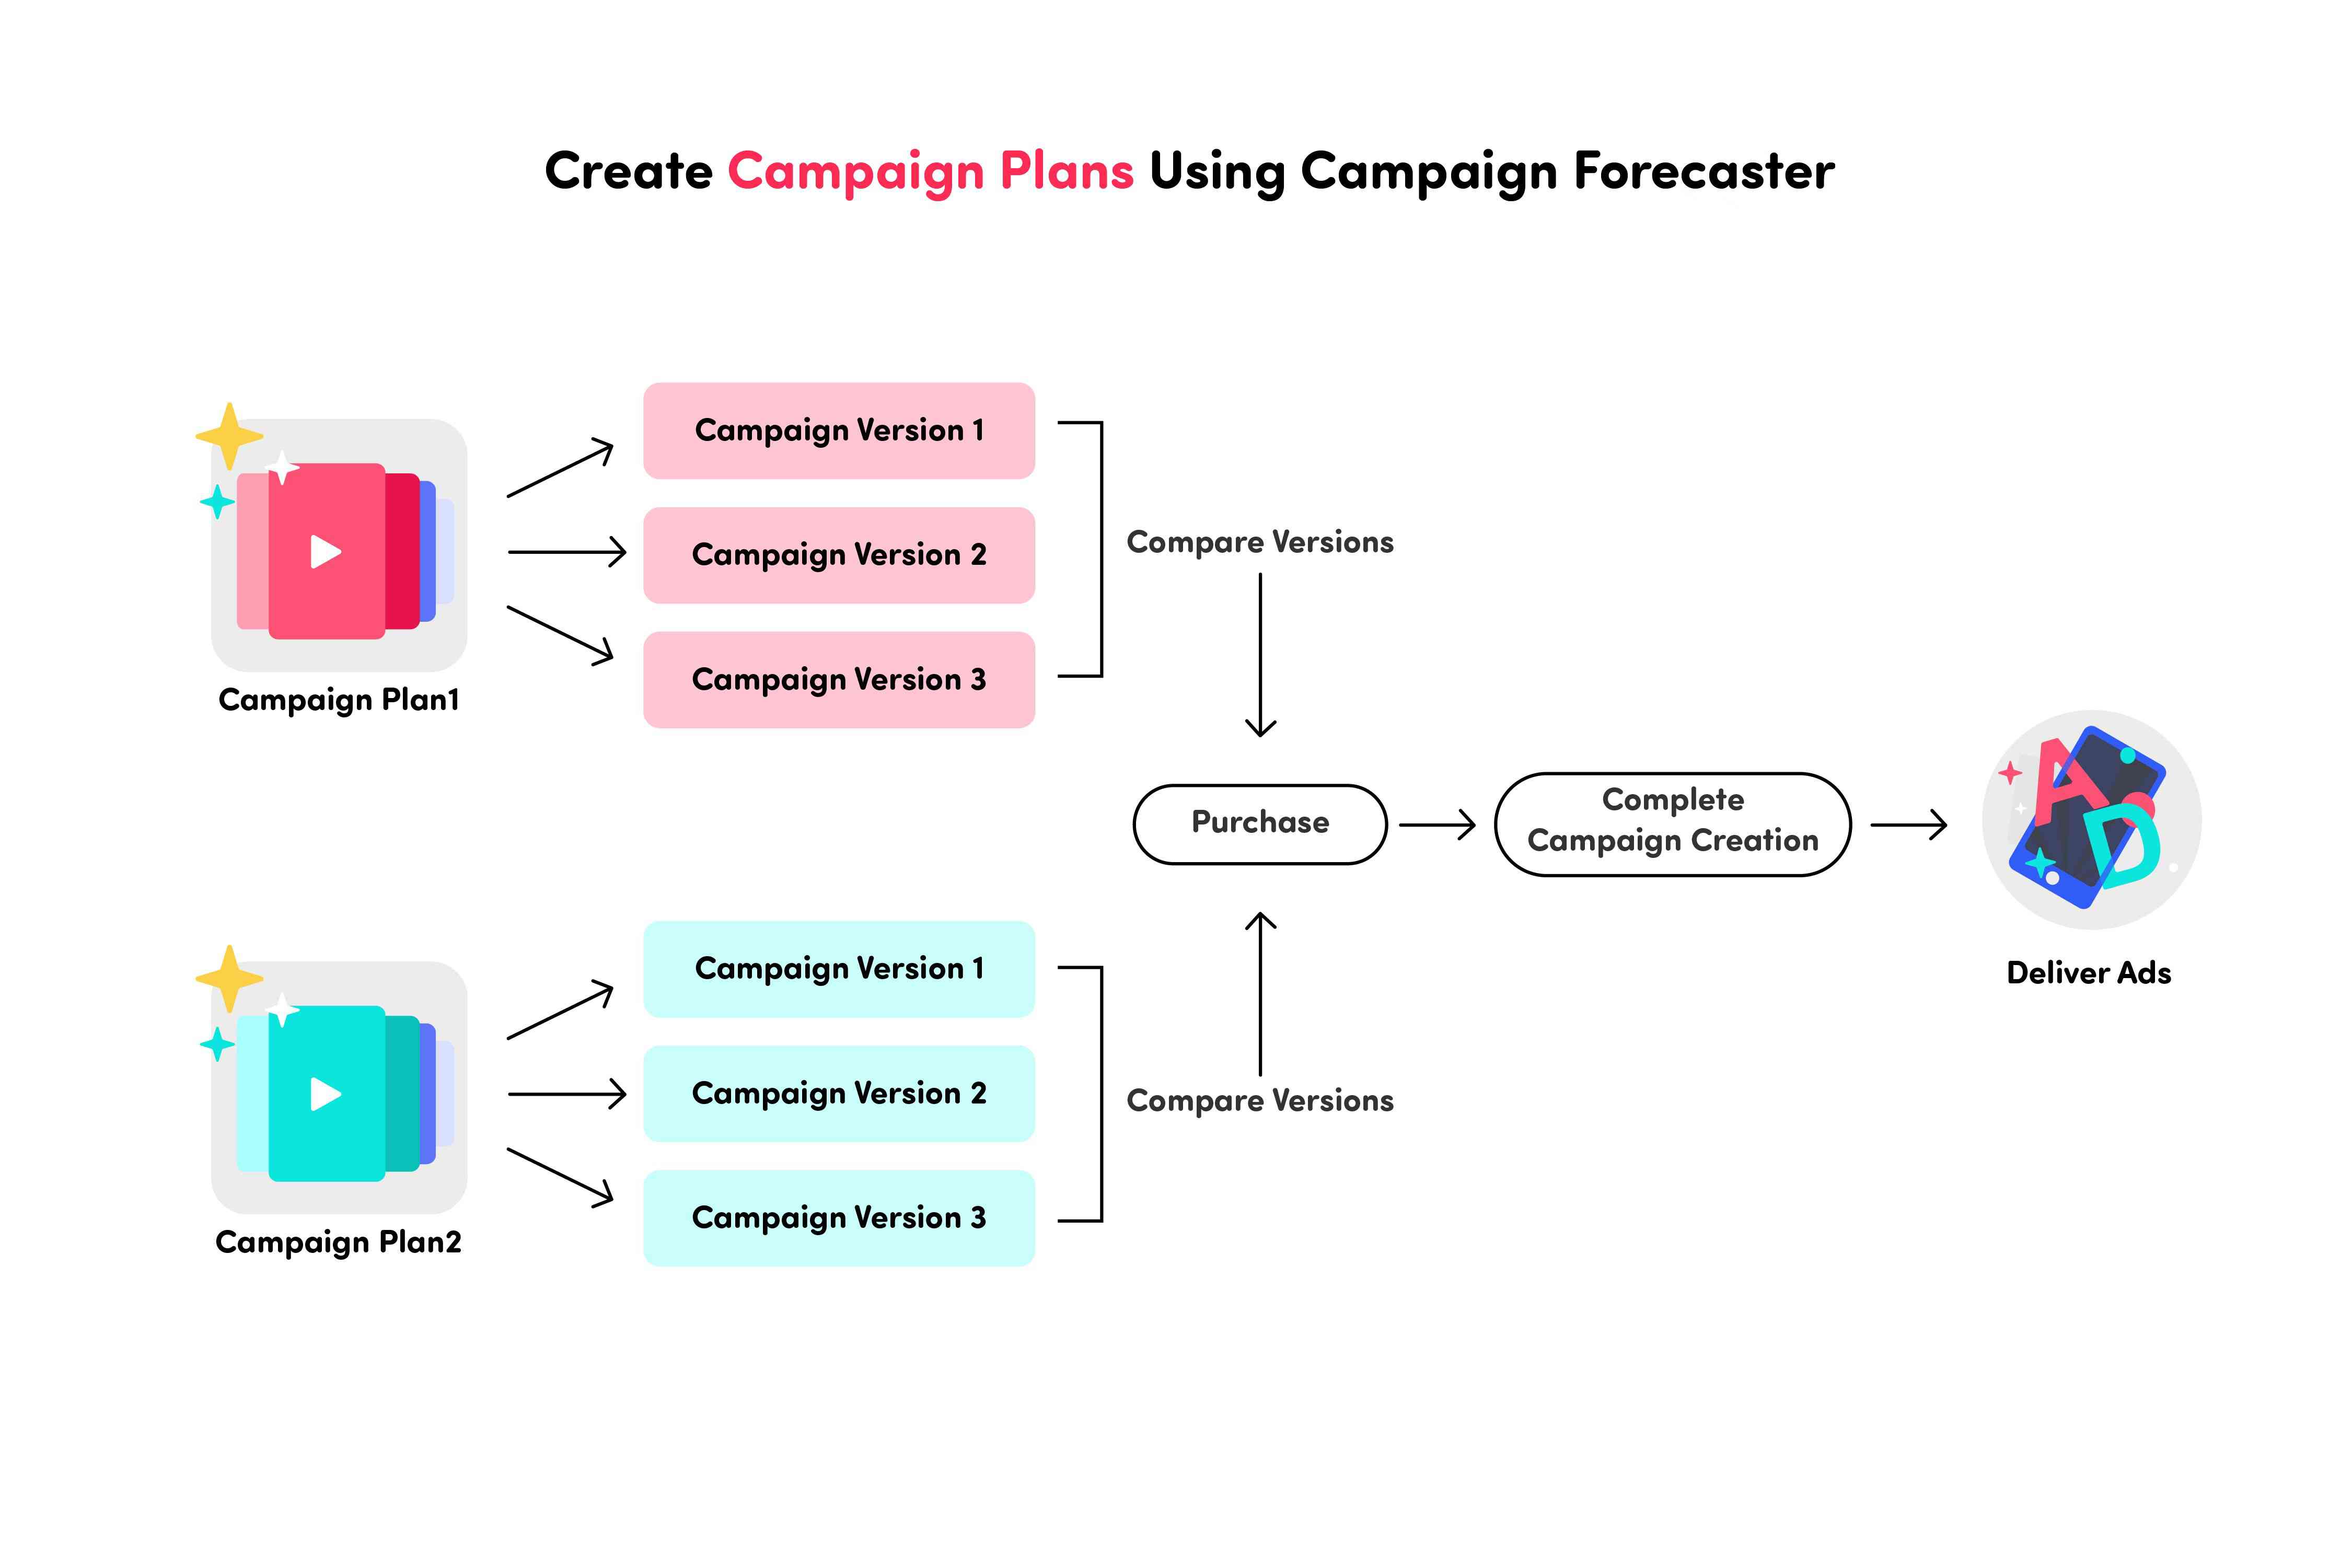 R & F Campaign Forecaster-Create Campaign Plans